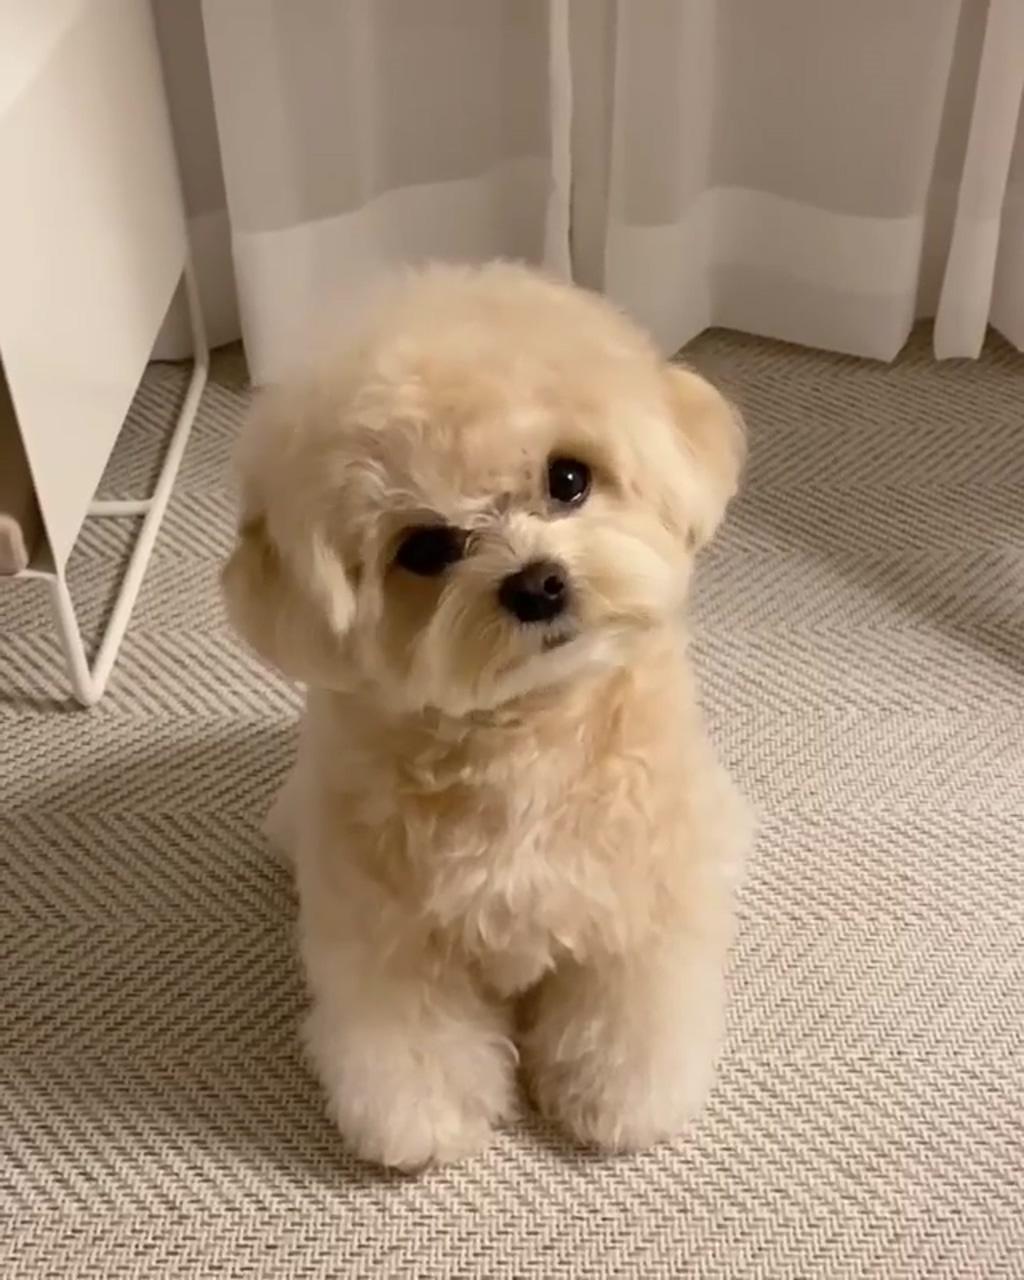 Cutest toy poodle - link ; sweet puppy